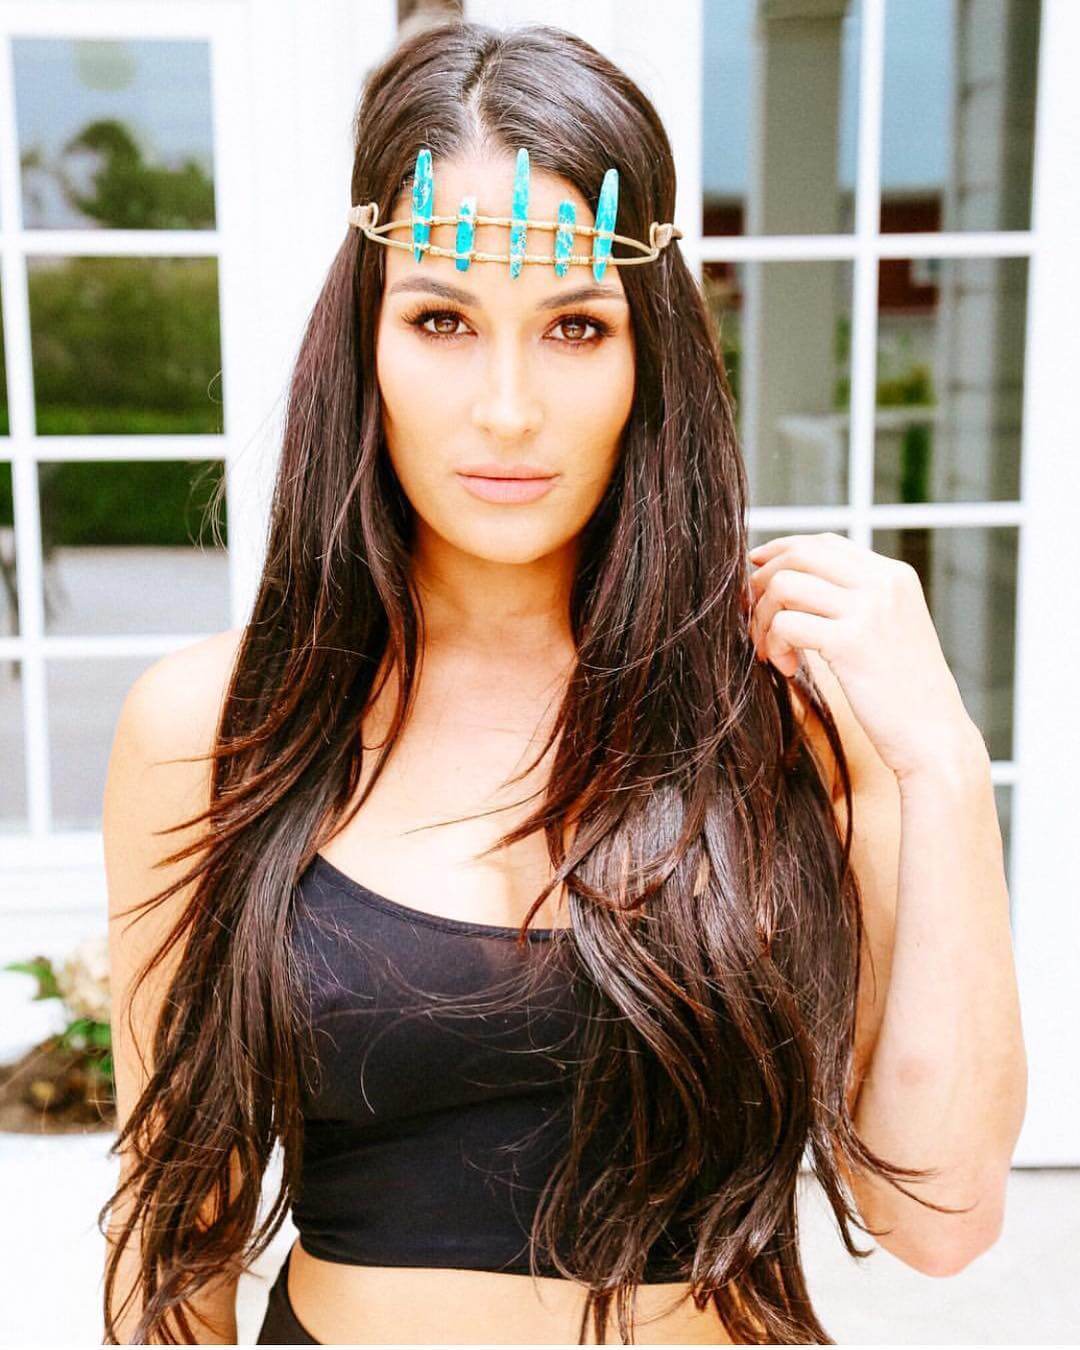 61 Sexy Nikki Bella Boobs Pictures That Are Simply Gorgeous | Best Of Comic Books